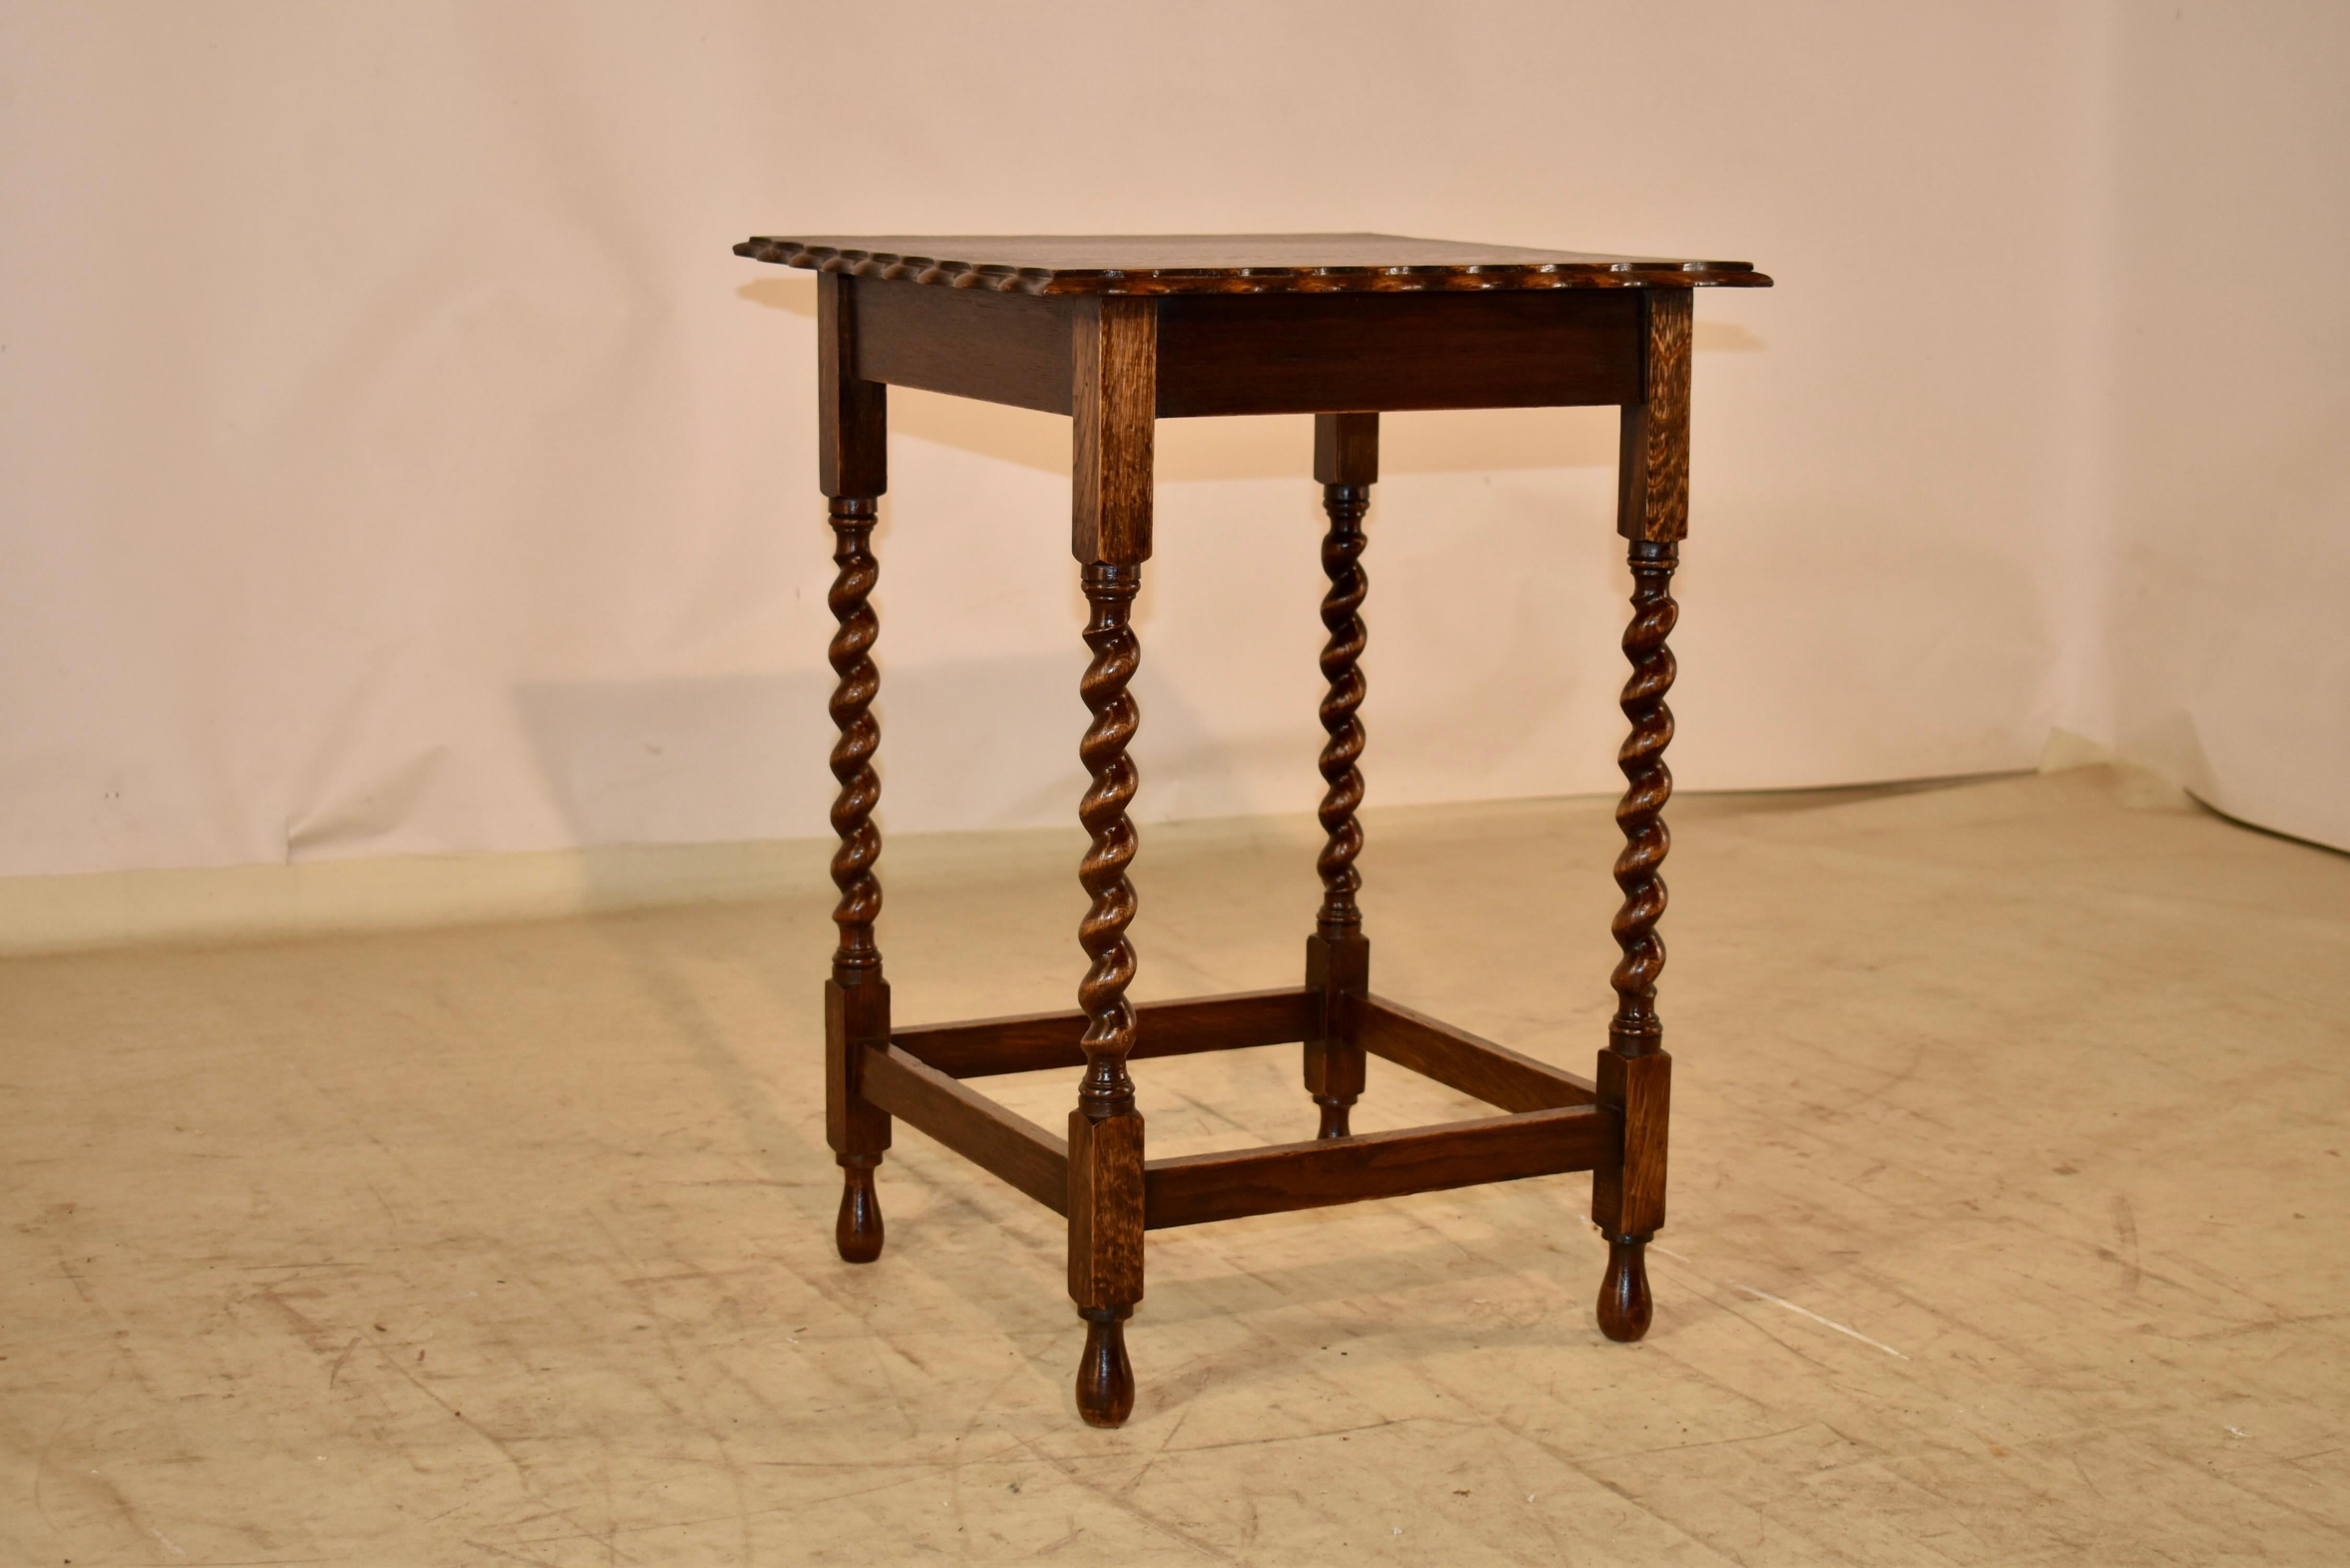 Circa 1900 English oak side table with a lovely hand scalloped and beveled top, following down to a simple apron and supported on hand turned barley twist legs.  The legs are joined by simple stretchers and raised on hand turned feet.